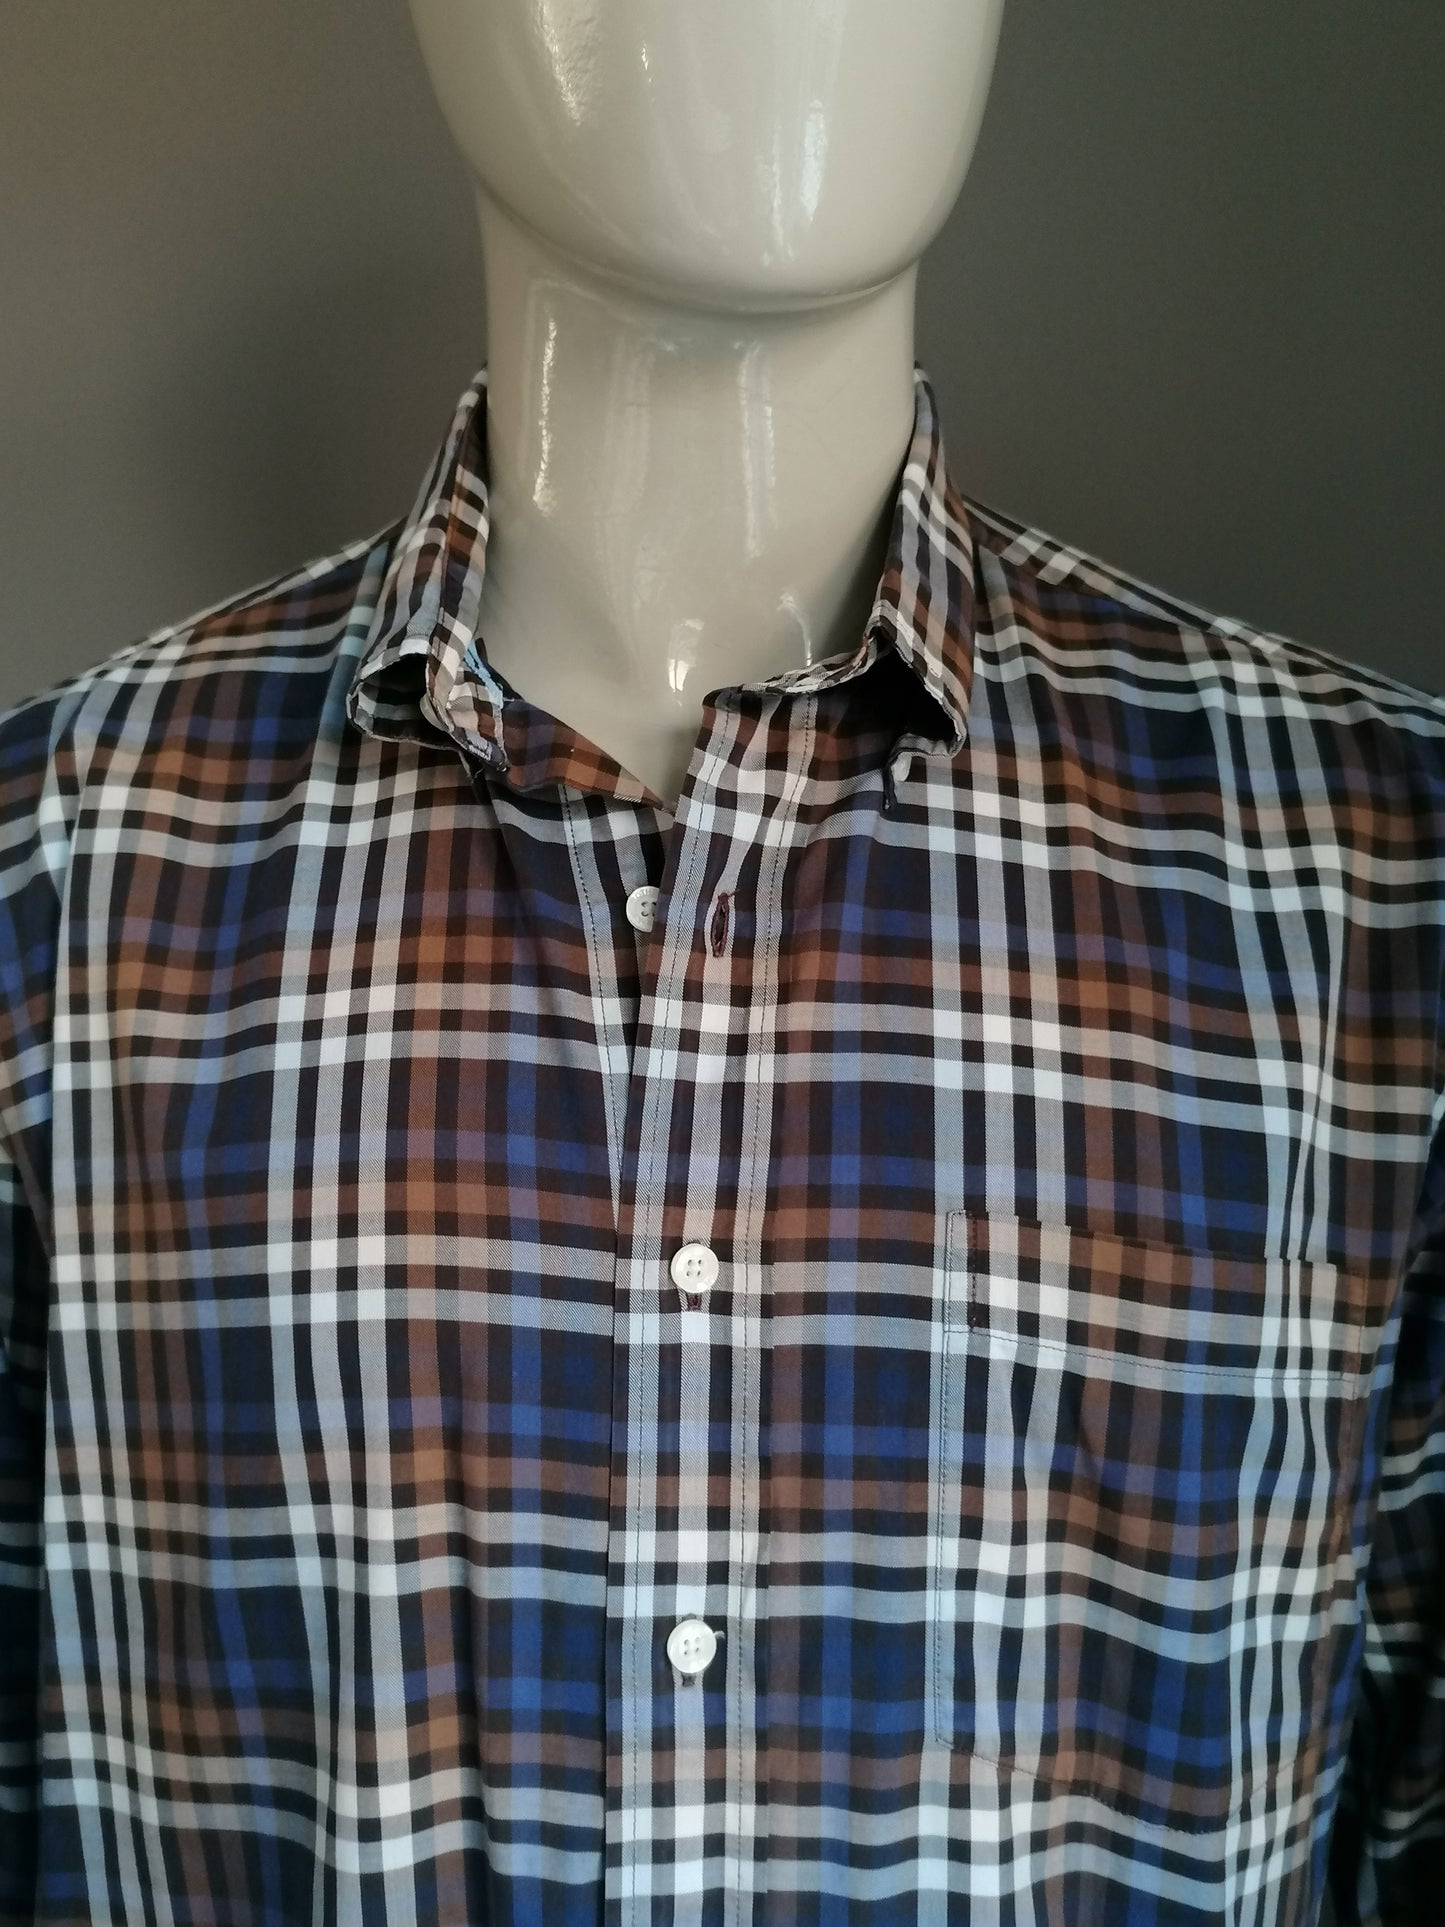 Boston Brothers Shirt. Brown blue blocked. Size XL. Chicago Fine Twill.